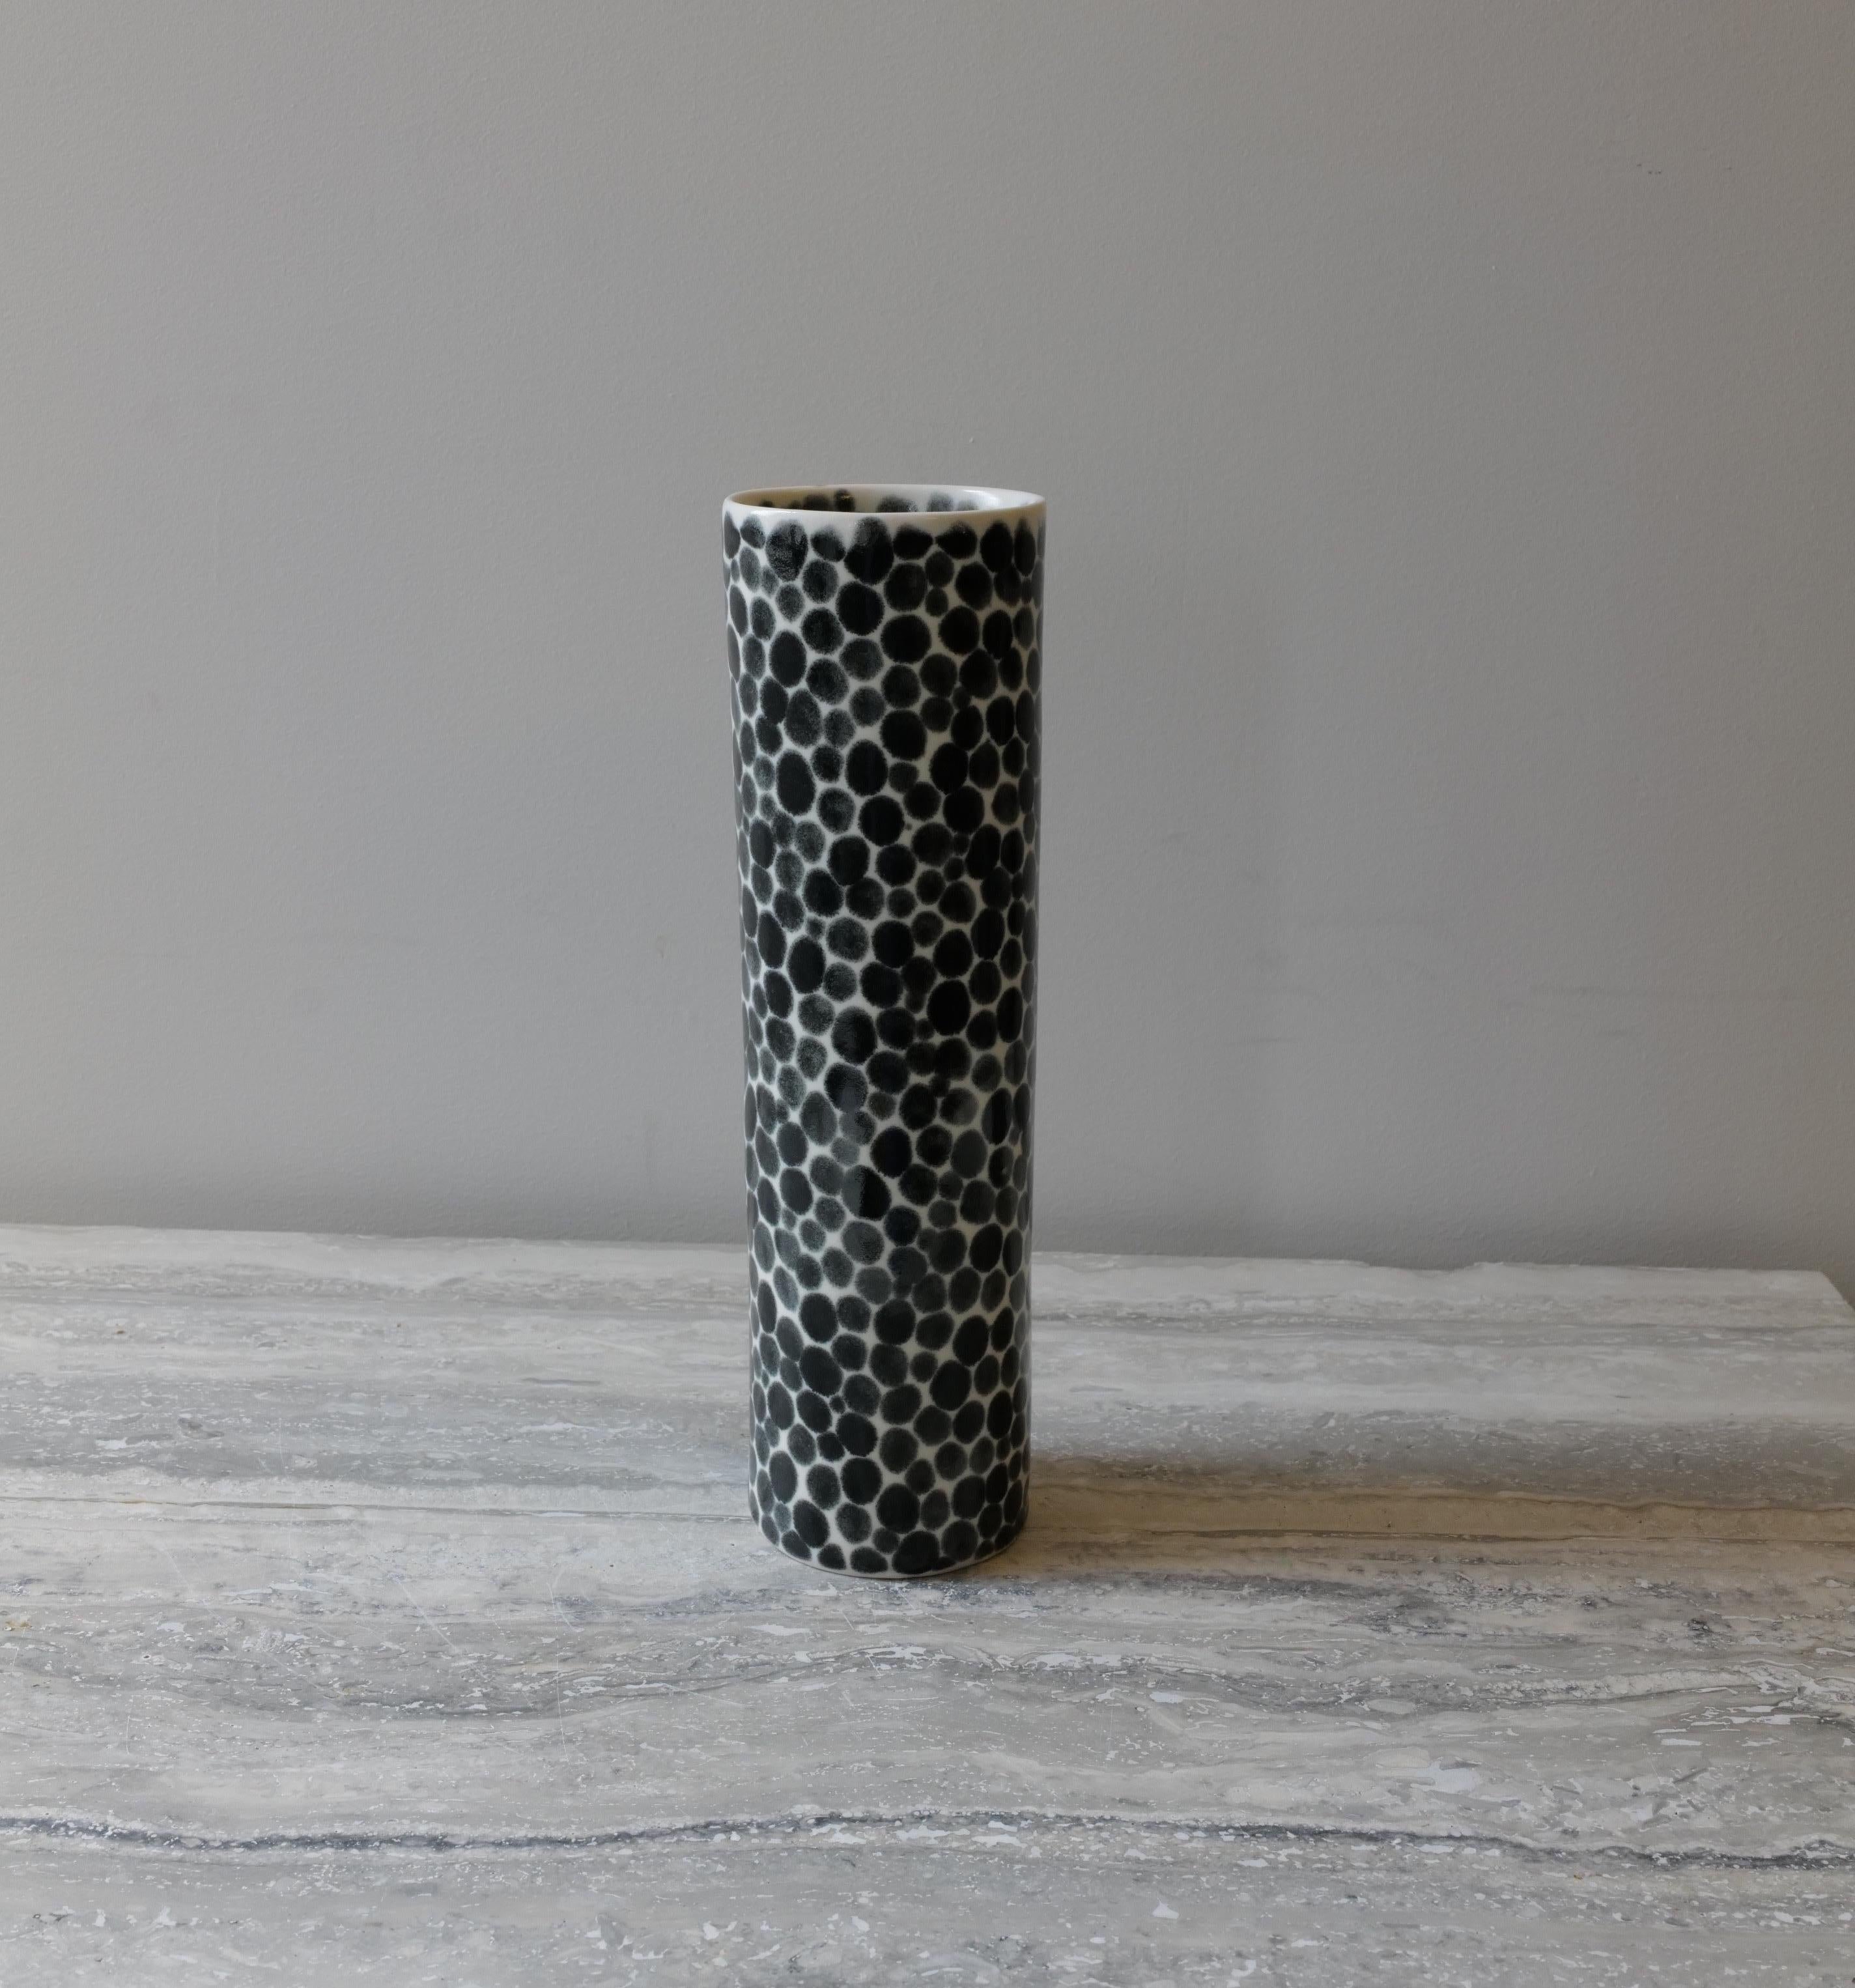 Tall, thin and elegant ceramic vase. Hand-cast in porcelain and once bisque fired, each dot is hand-painted with shiny black glaze. An unconventional layered glazing technique, developed by the artist, is used in these cast porcelain pieces. The